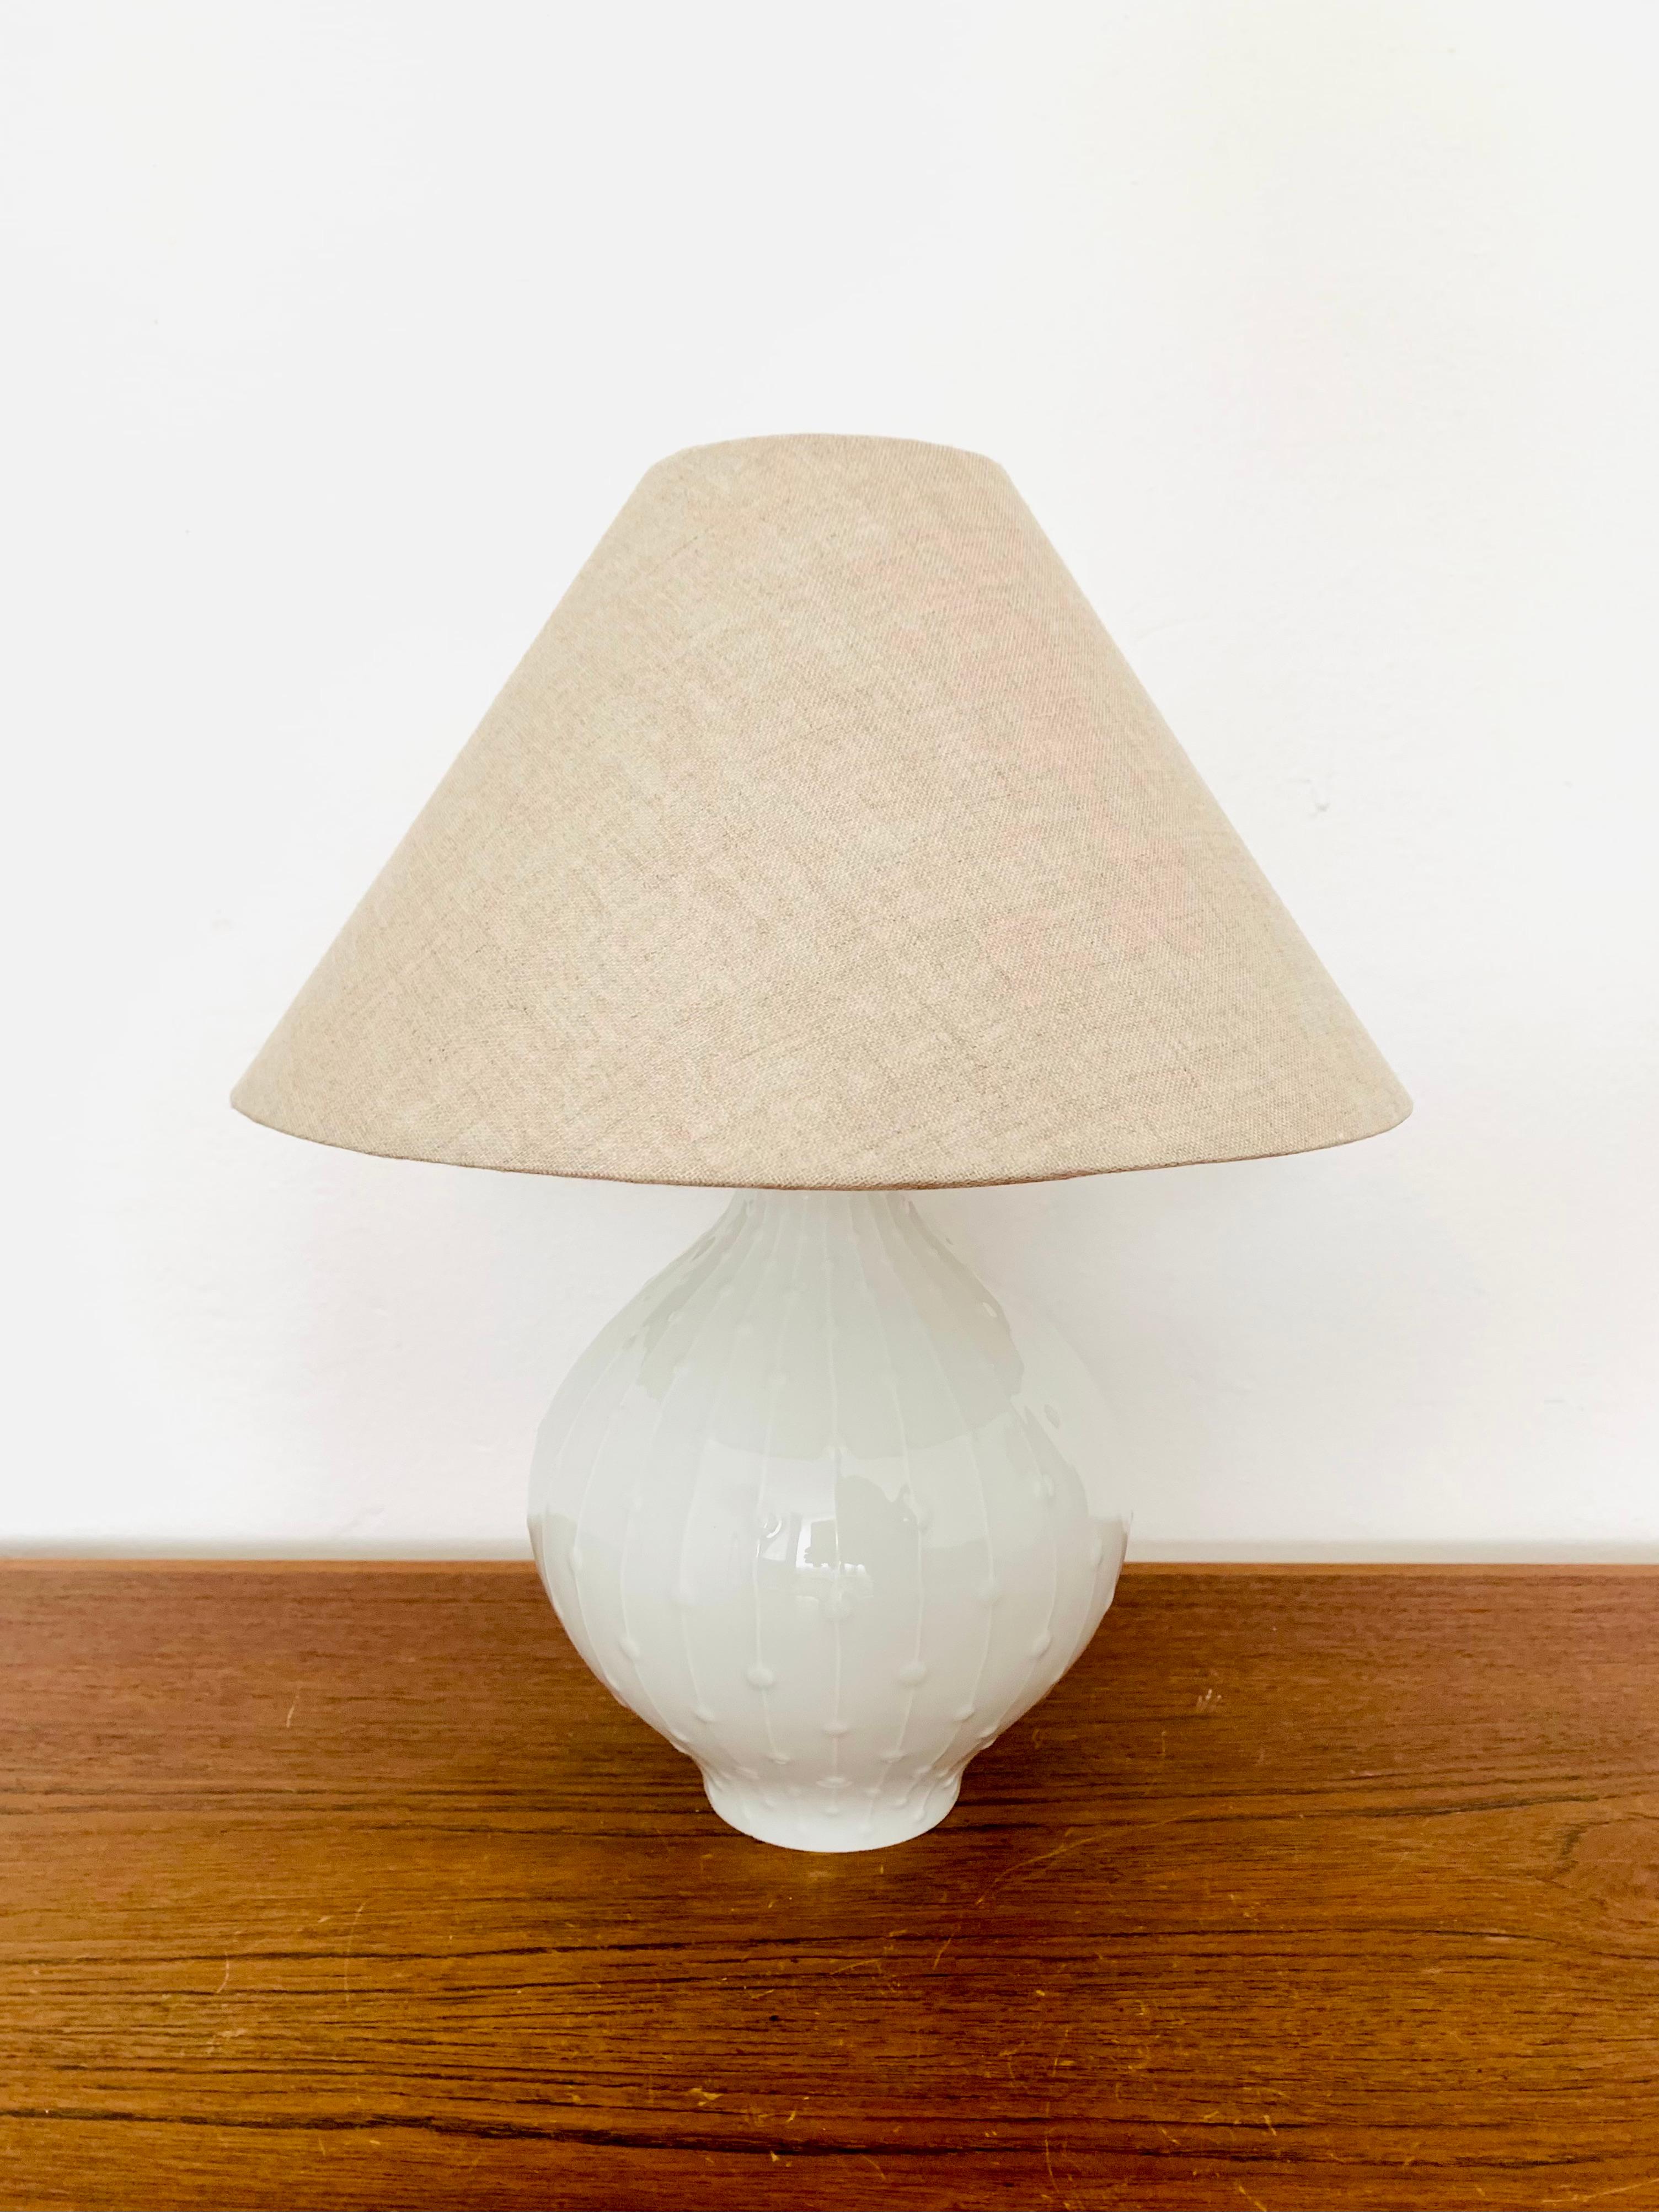 Impressive porcelain table lamp from the 1960s.
Extremely high -quality workmanship and very nice design.

Manufacturer: Hutschenreuther art department

Condition:

Very good vintage condition with minimal signs of wear.
The lampshade is new.

The